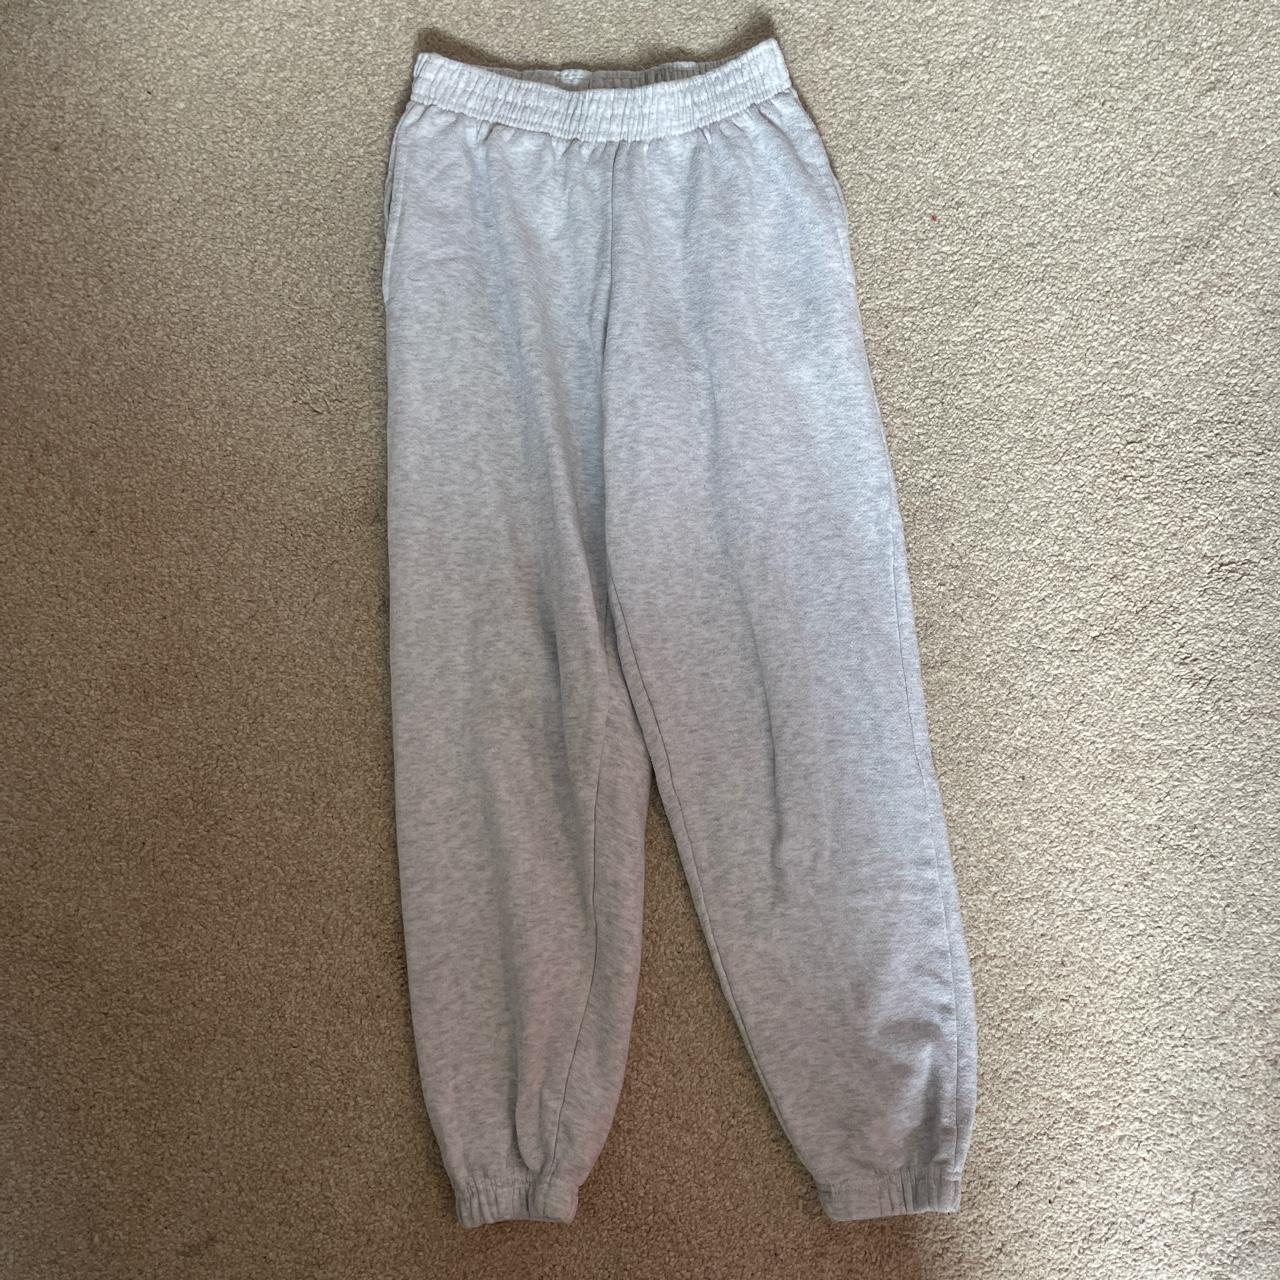 Small Grey New Look joggers, perfect condition would... - Depop